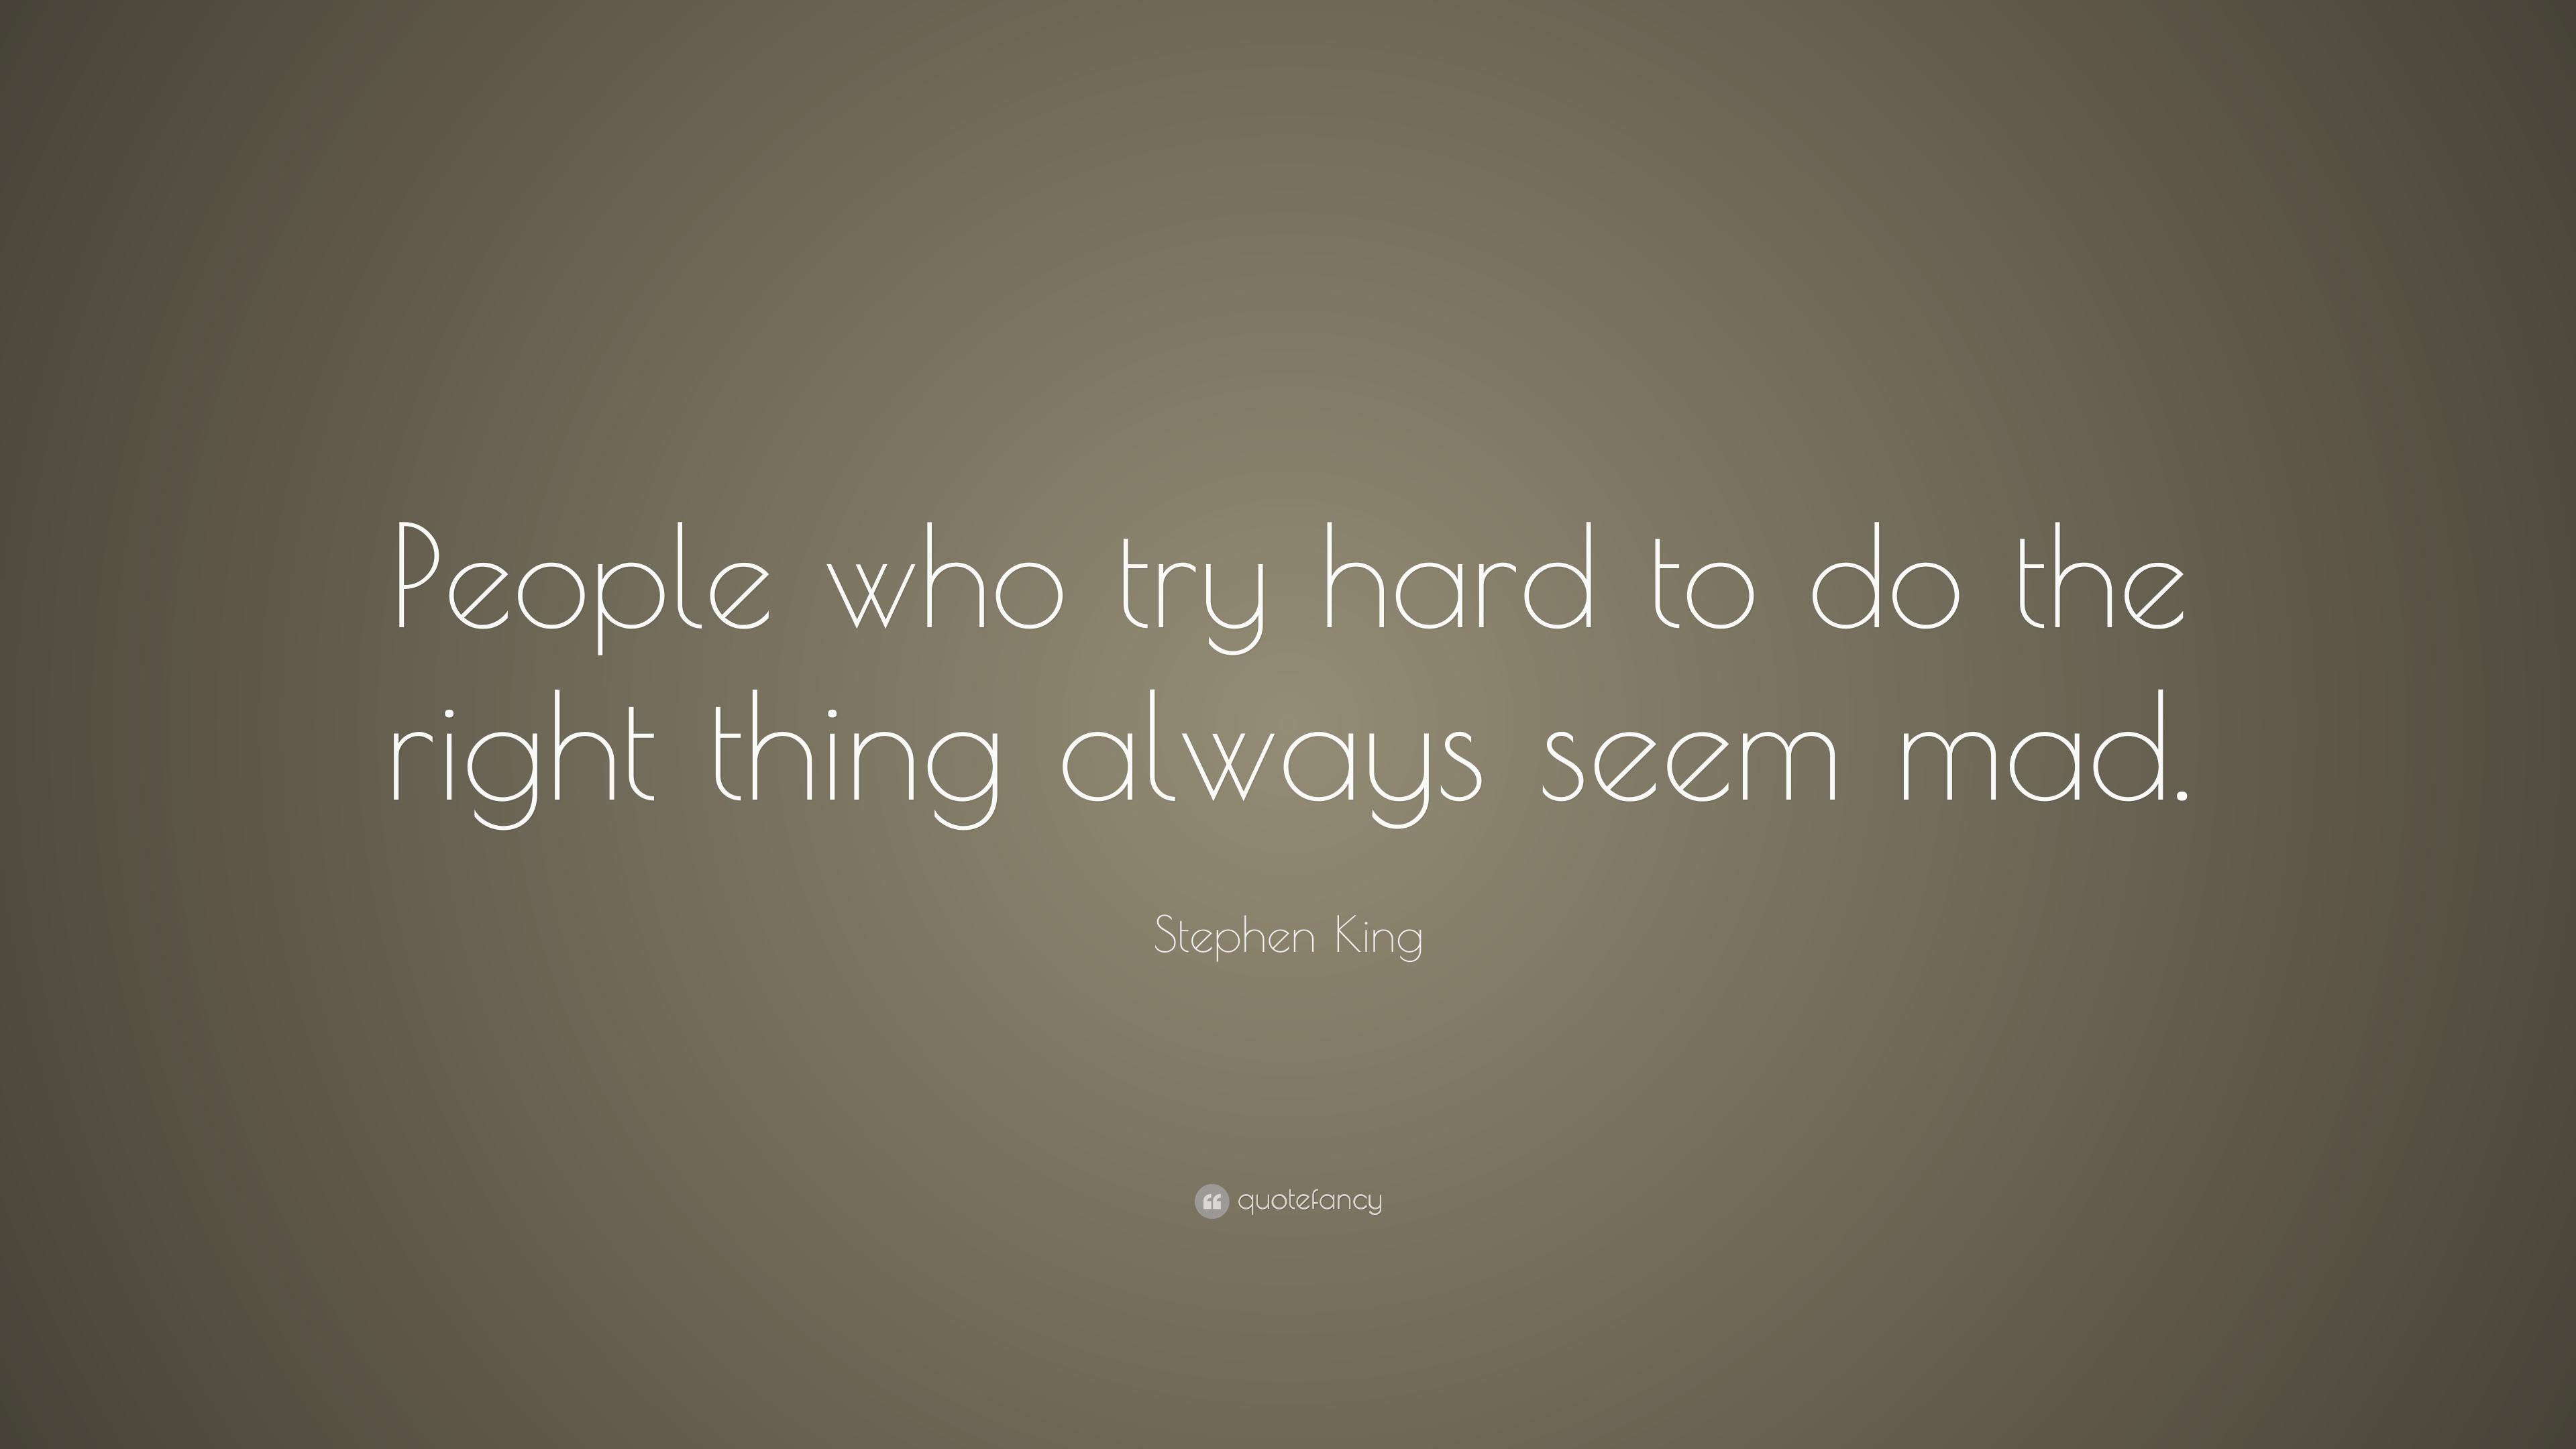 Stephen King Quote: “People who try hard to do the right thing